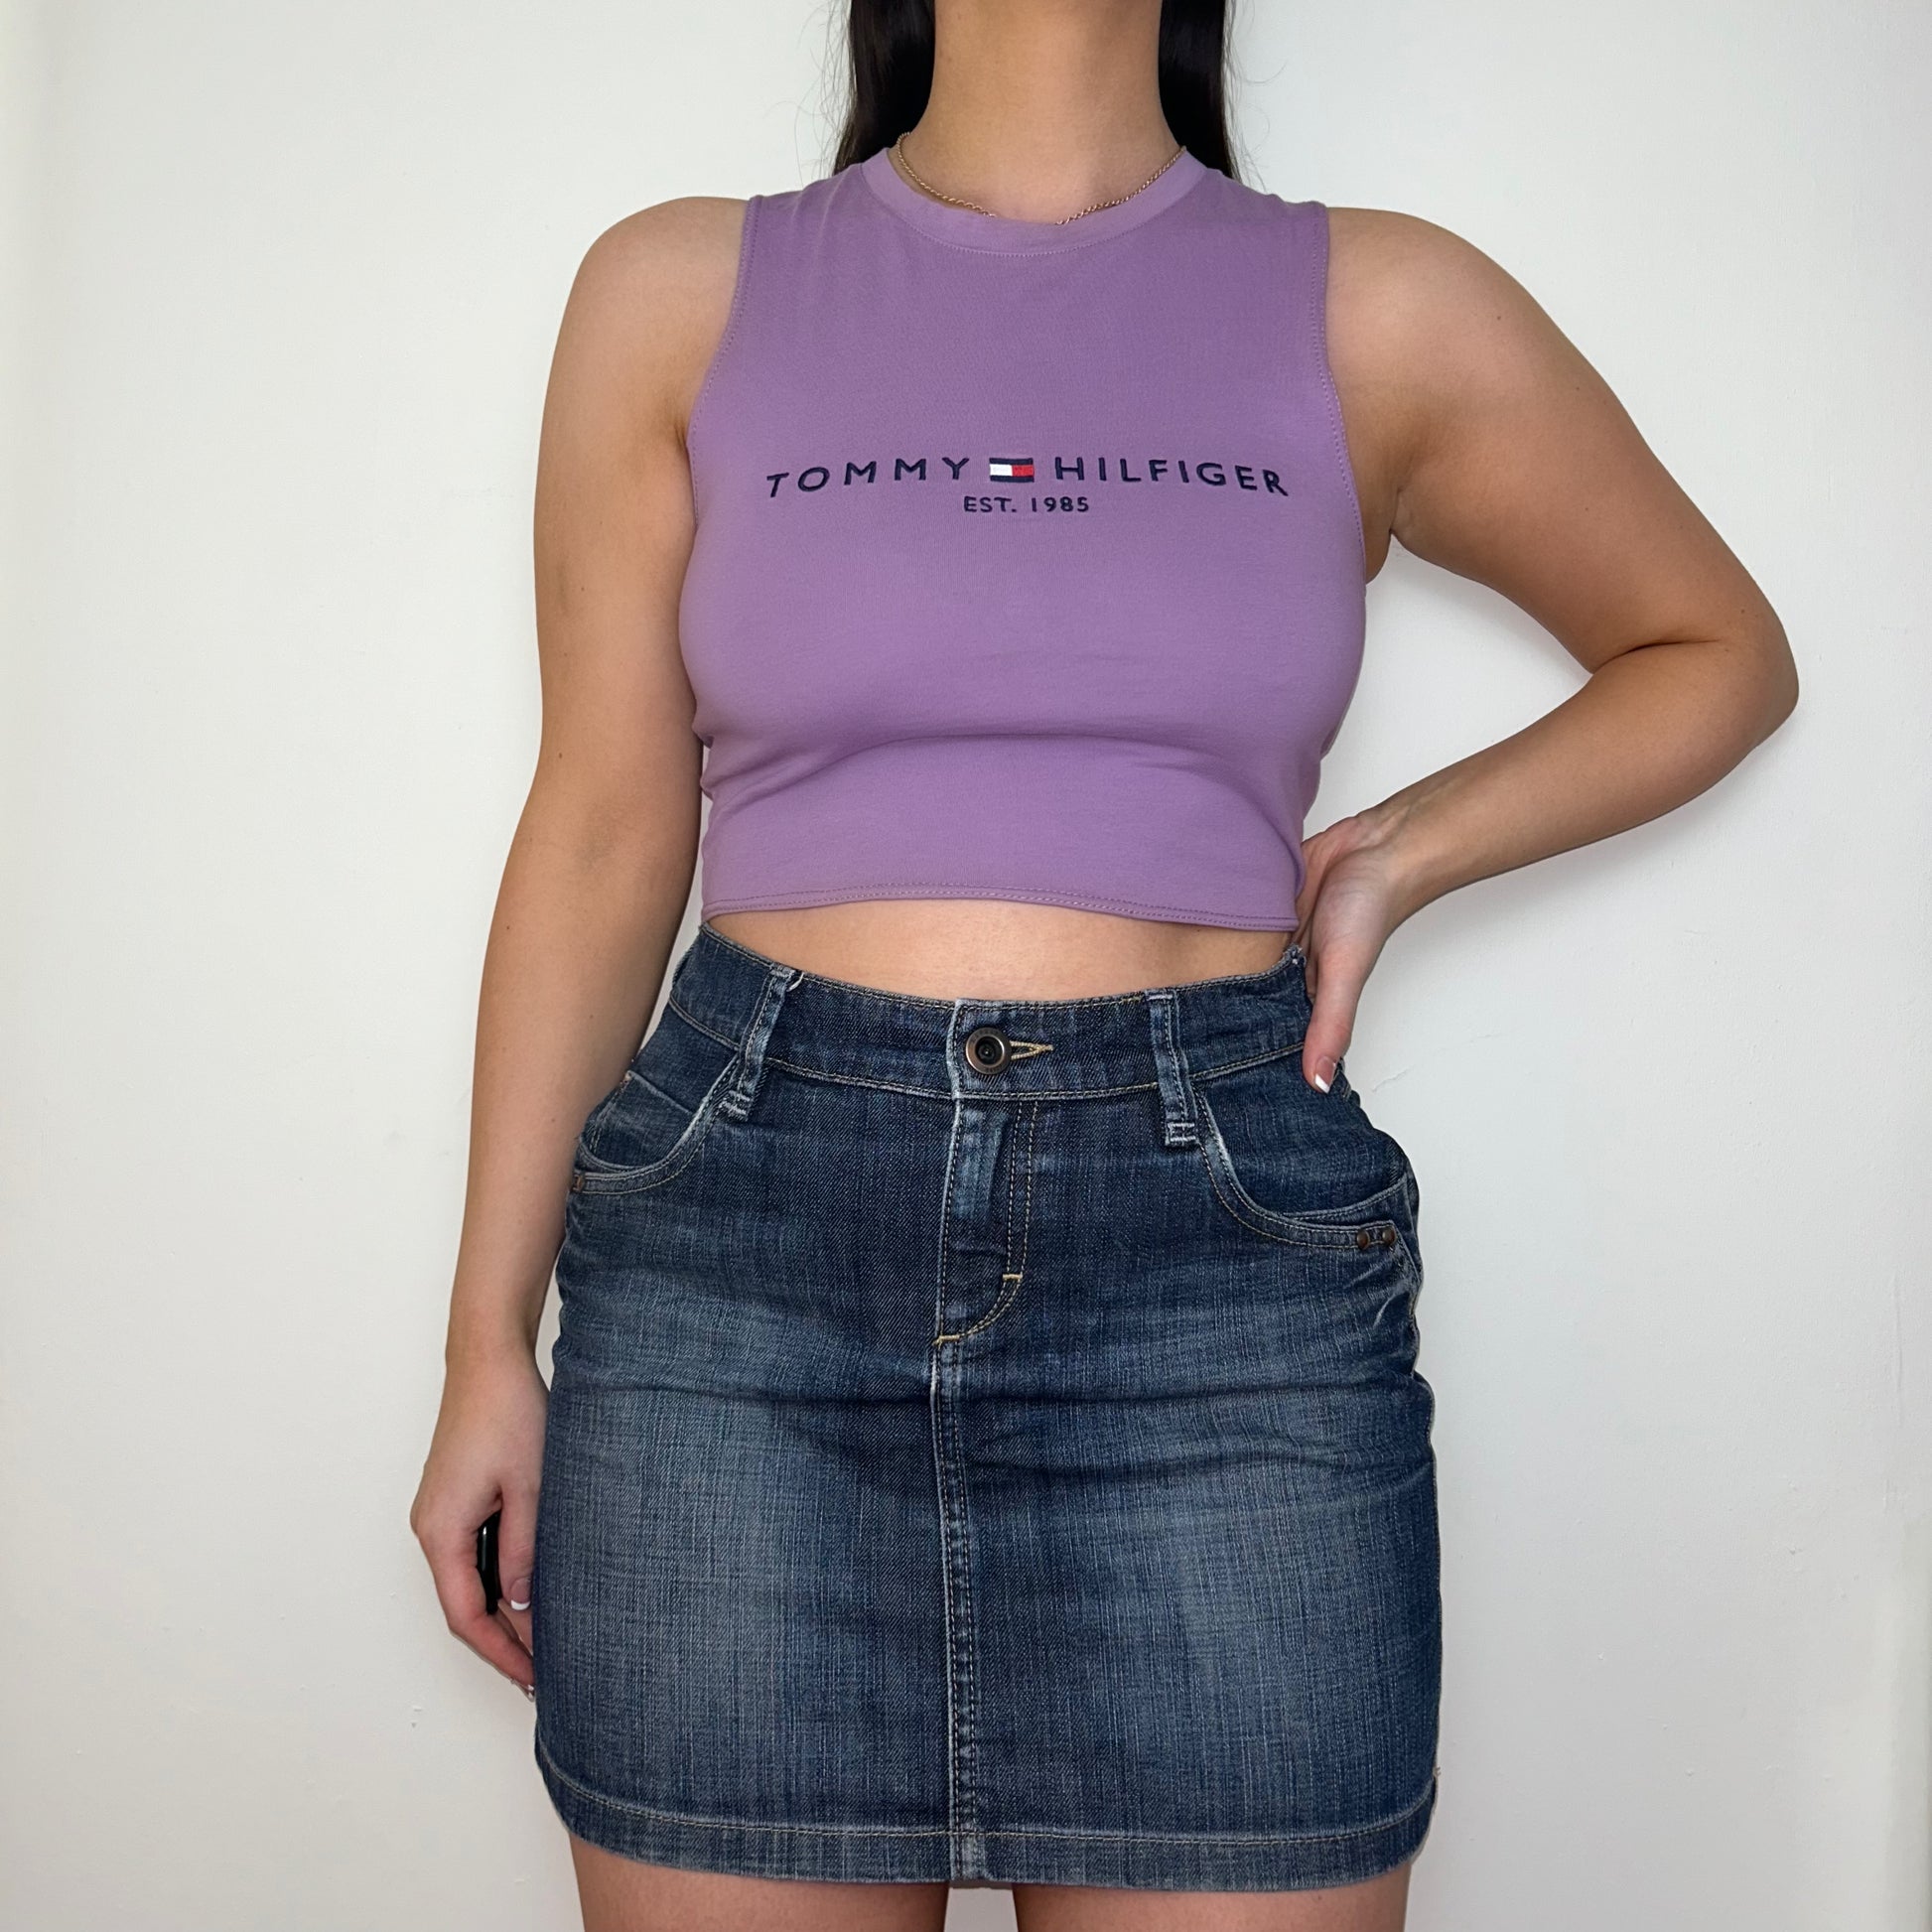 lilac sleeveless crop top with black tommy hilfiger logo shown on a model wearing a denim mini skirt